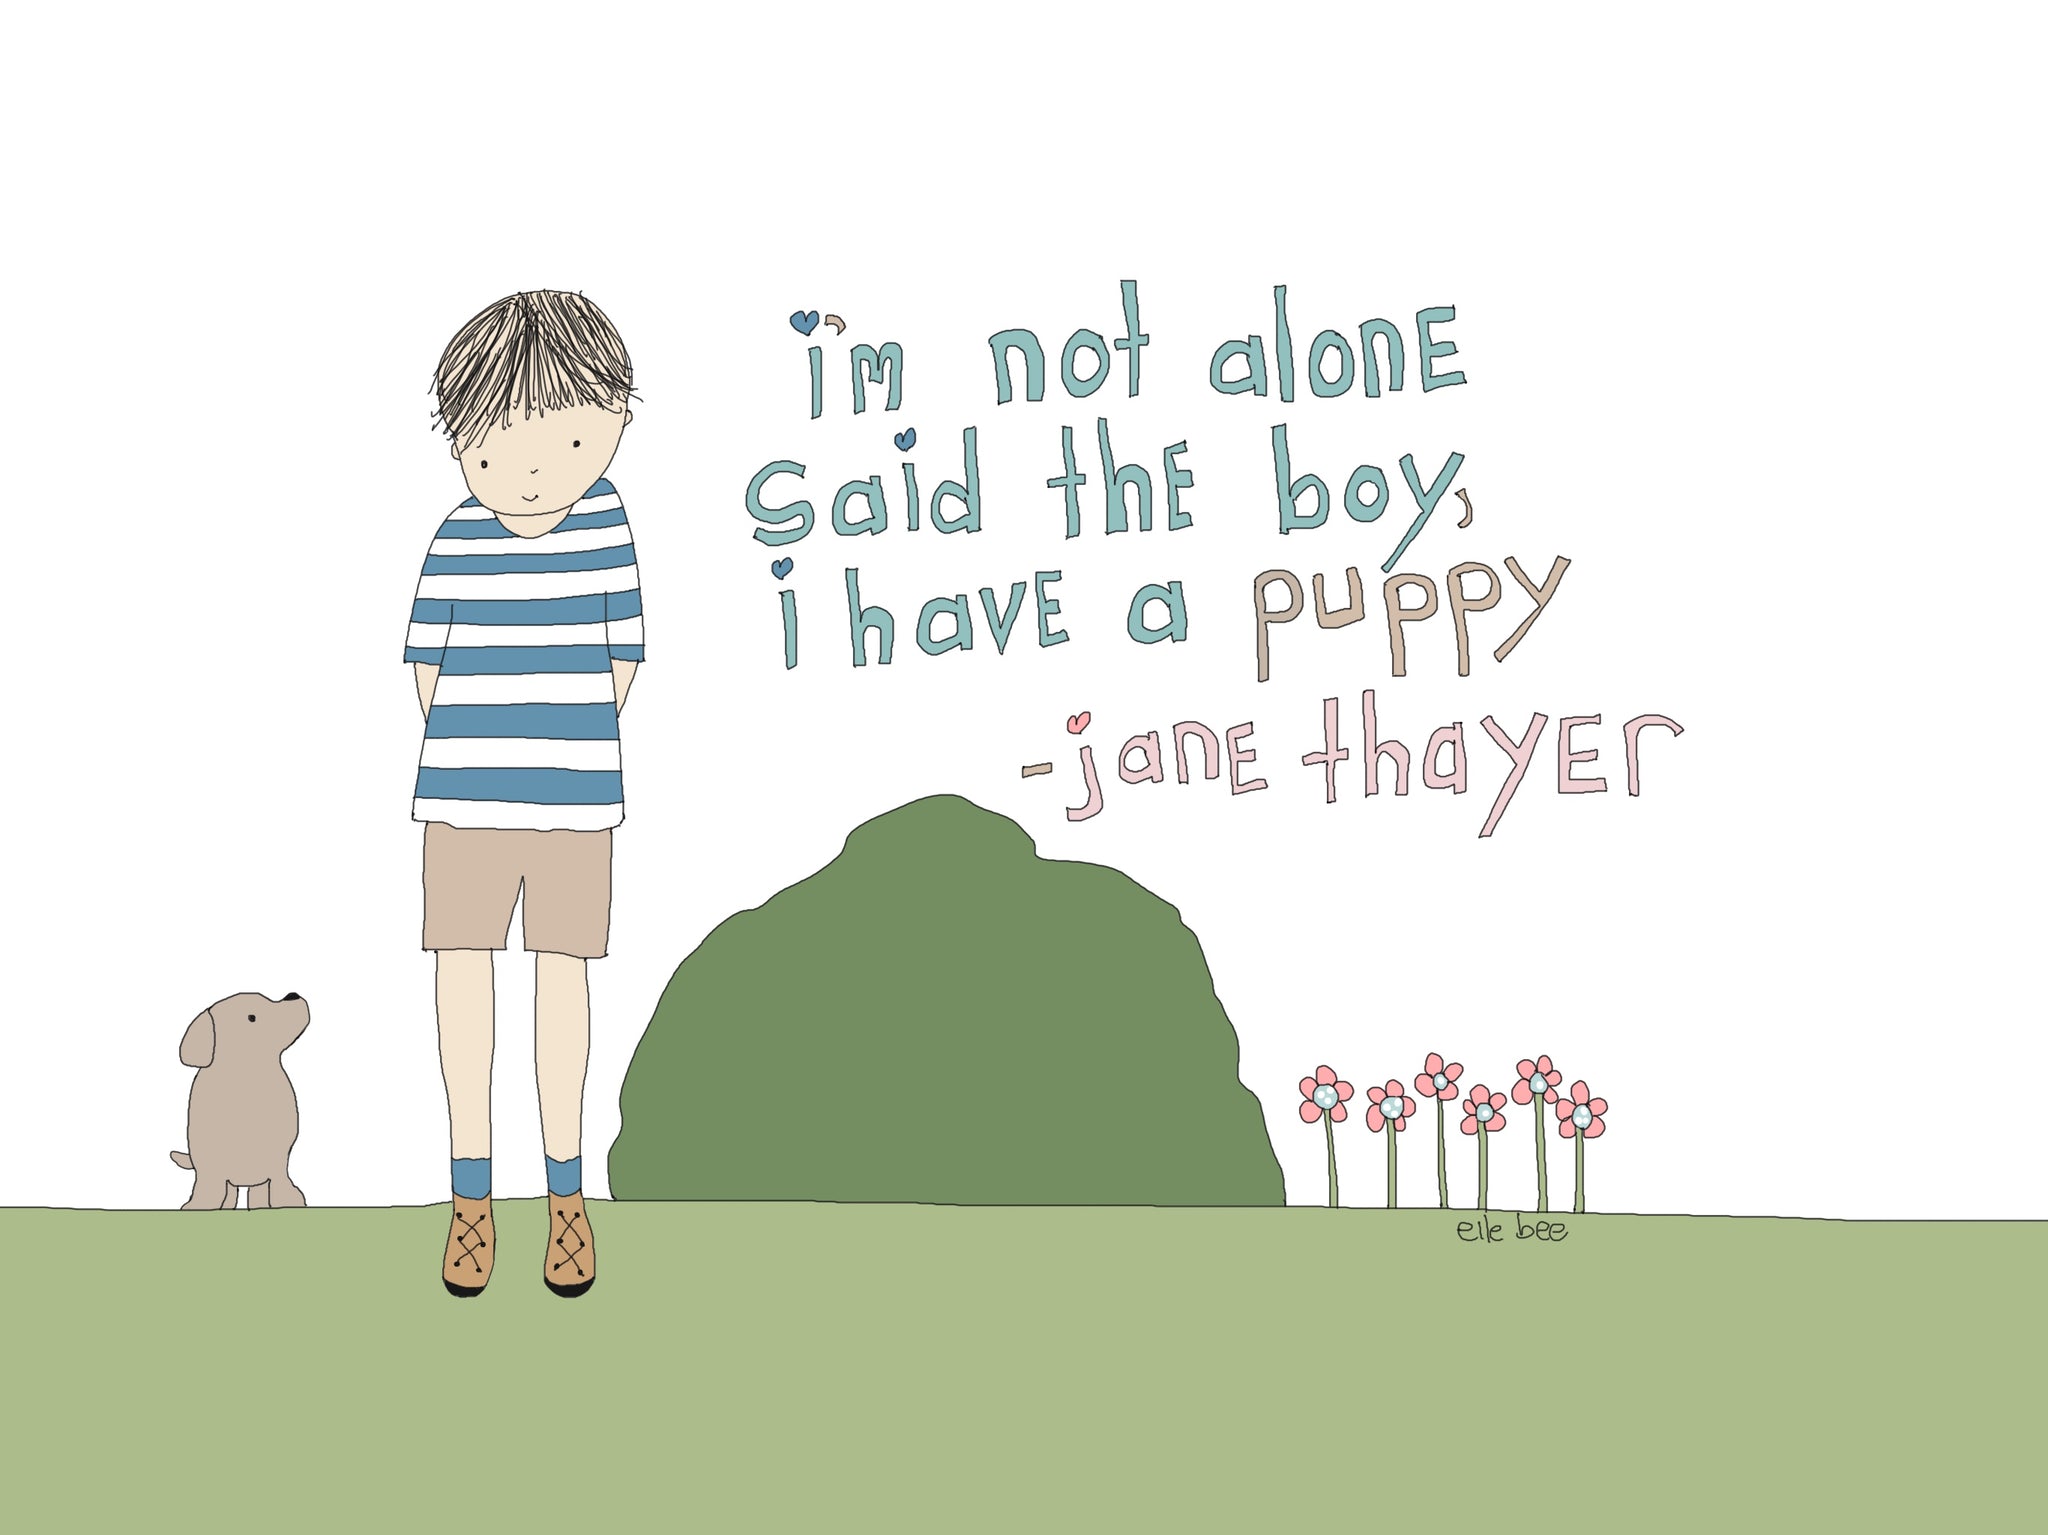 Greeting card" I'm not alone...I have a puppy"